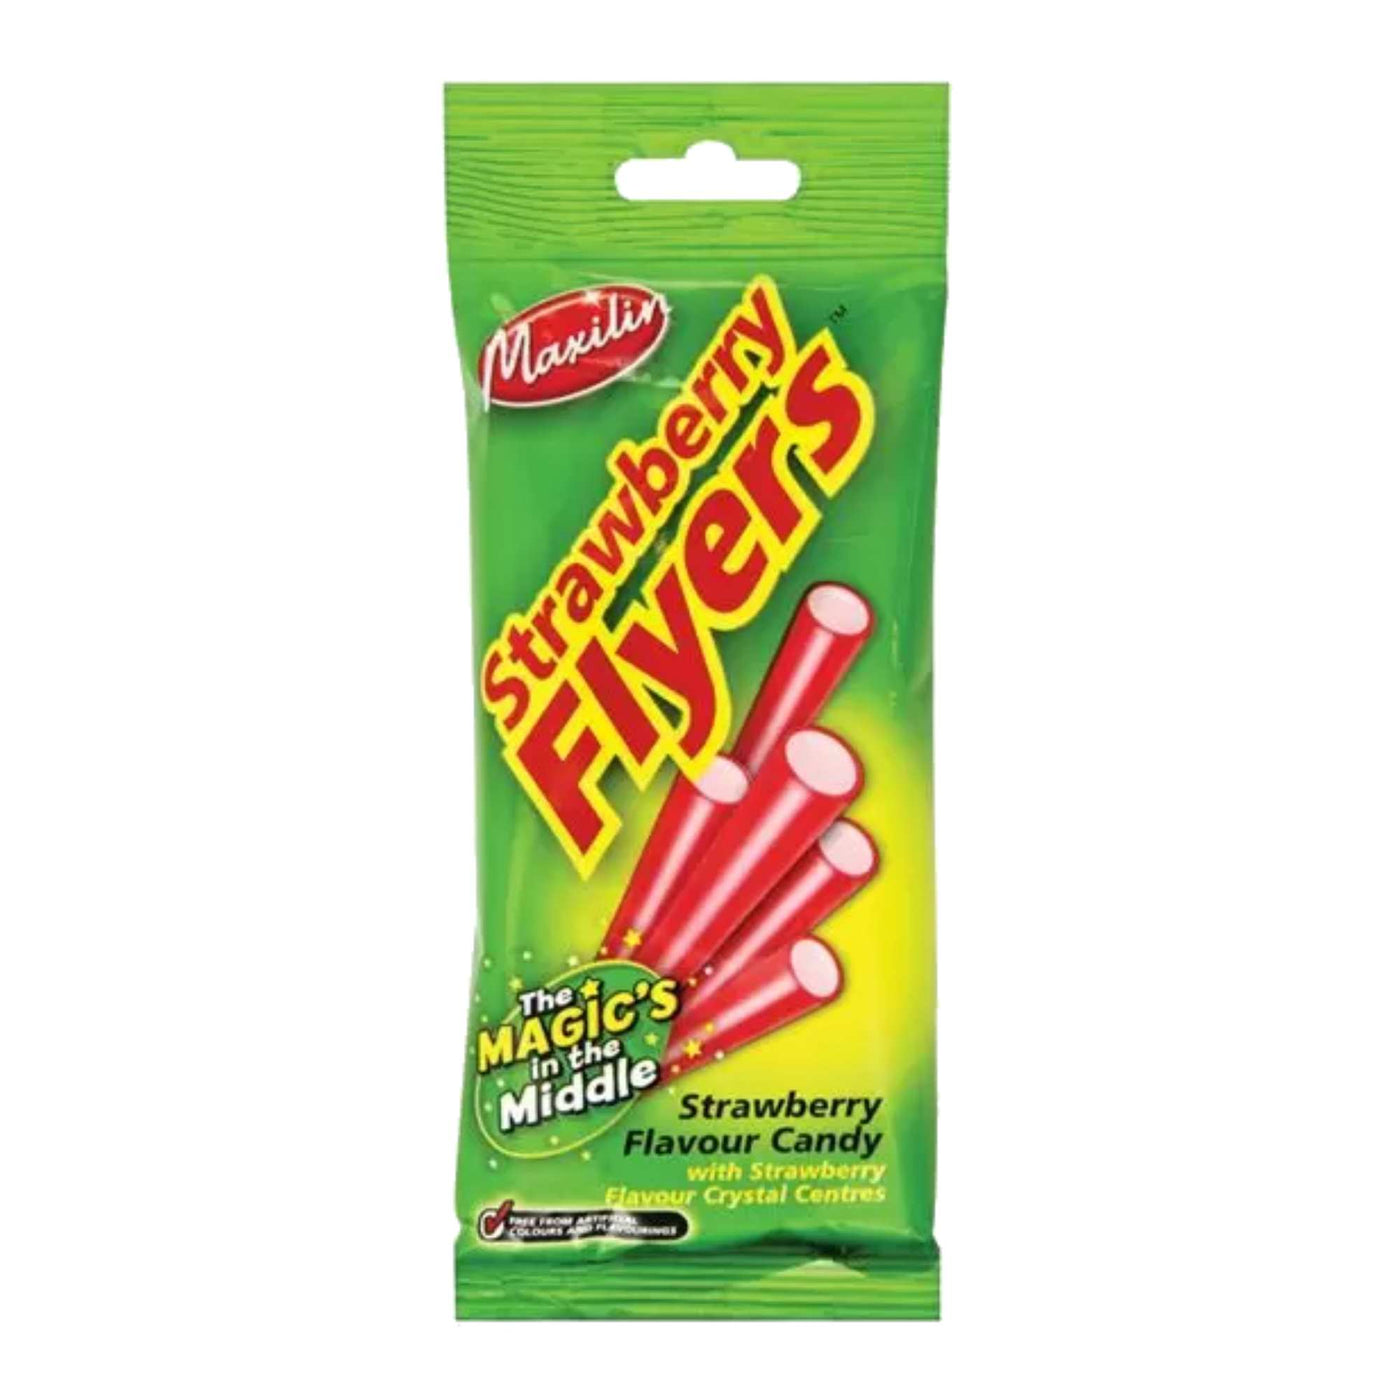 Maxilin Strawberry Flyers – 'Fruit Liquorice' Tubes With Sherbet Crystals